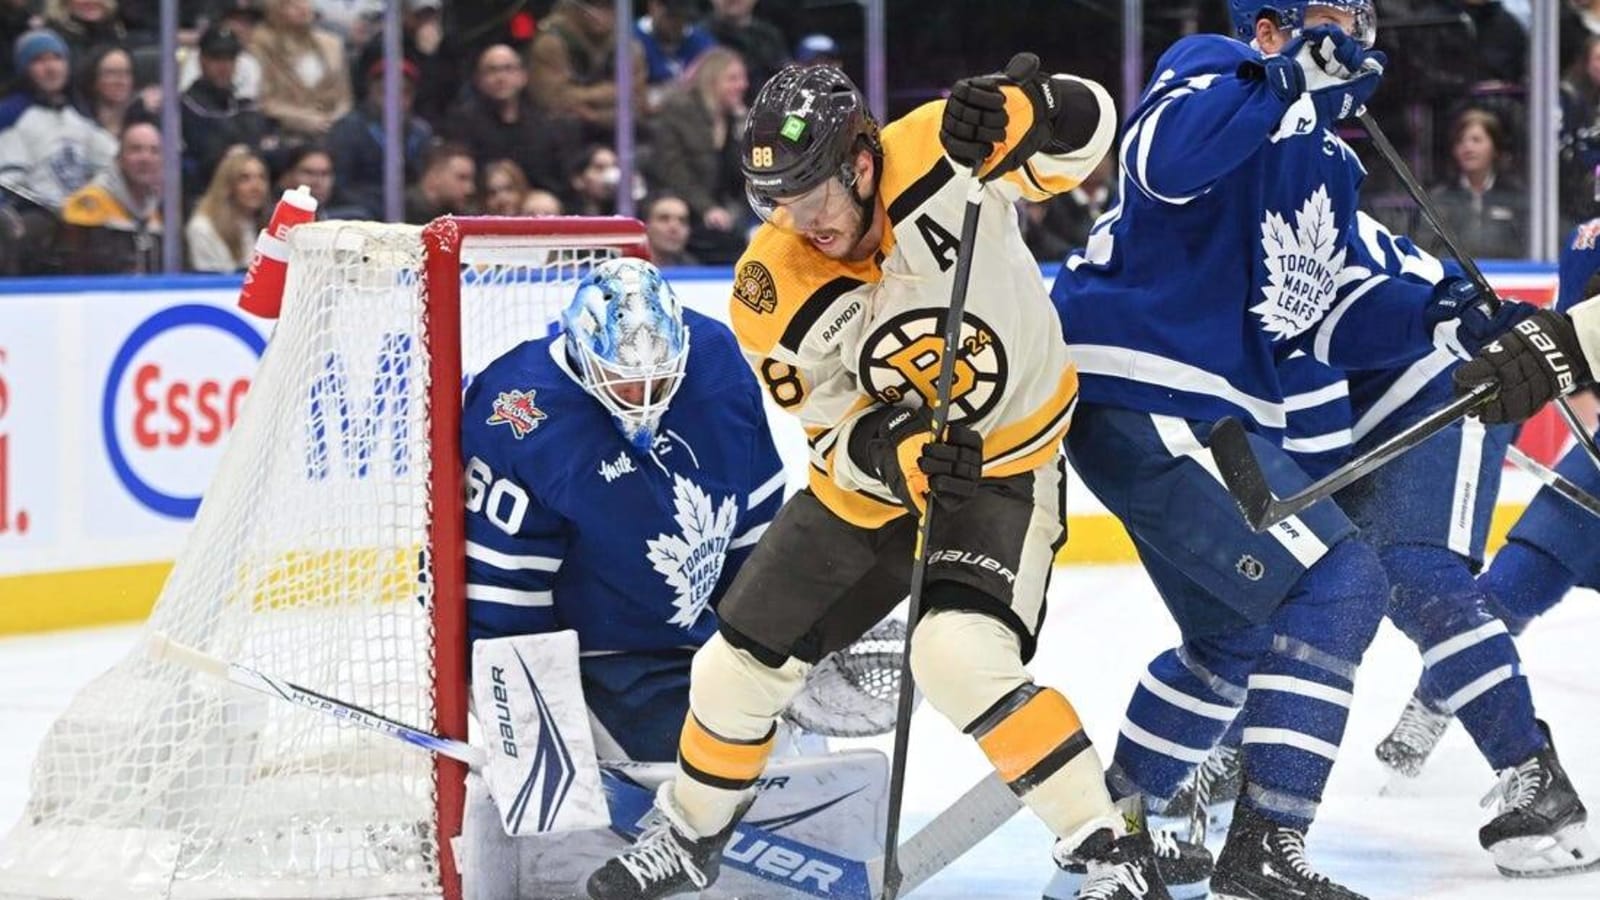 Leafs tie it with 6 seconds left, but Bruins win in OT